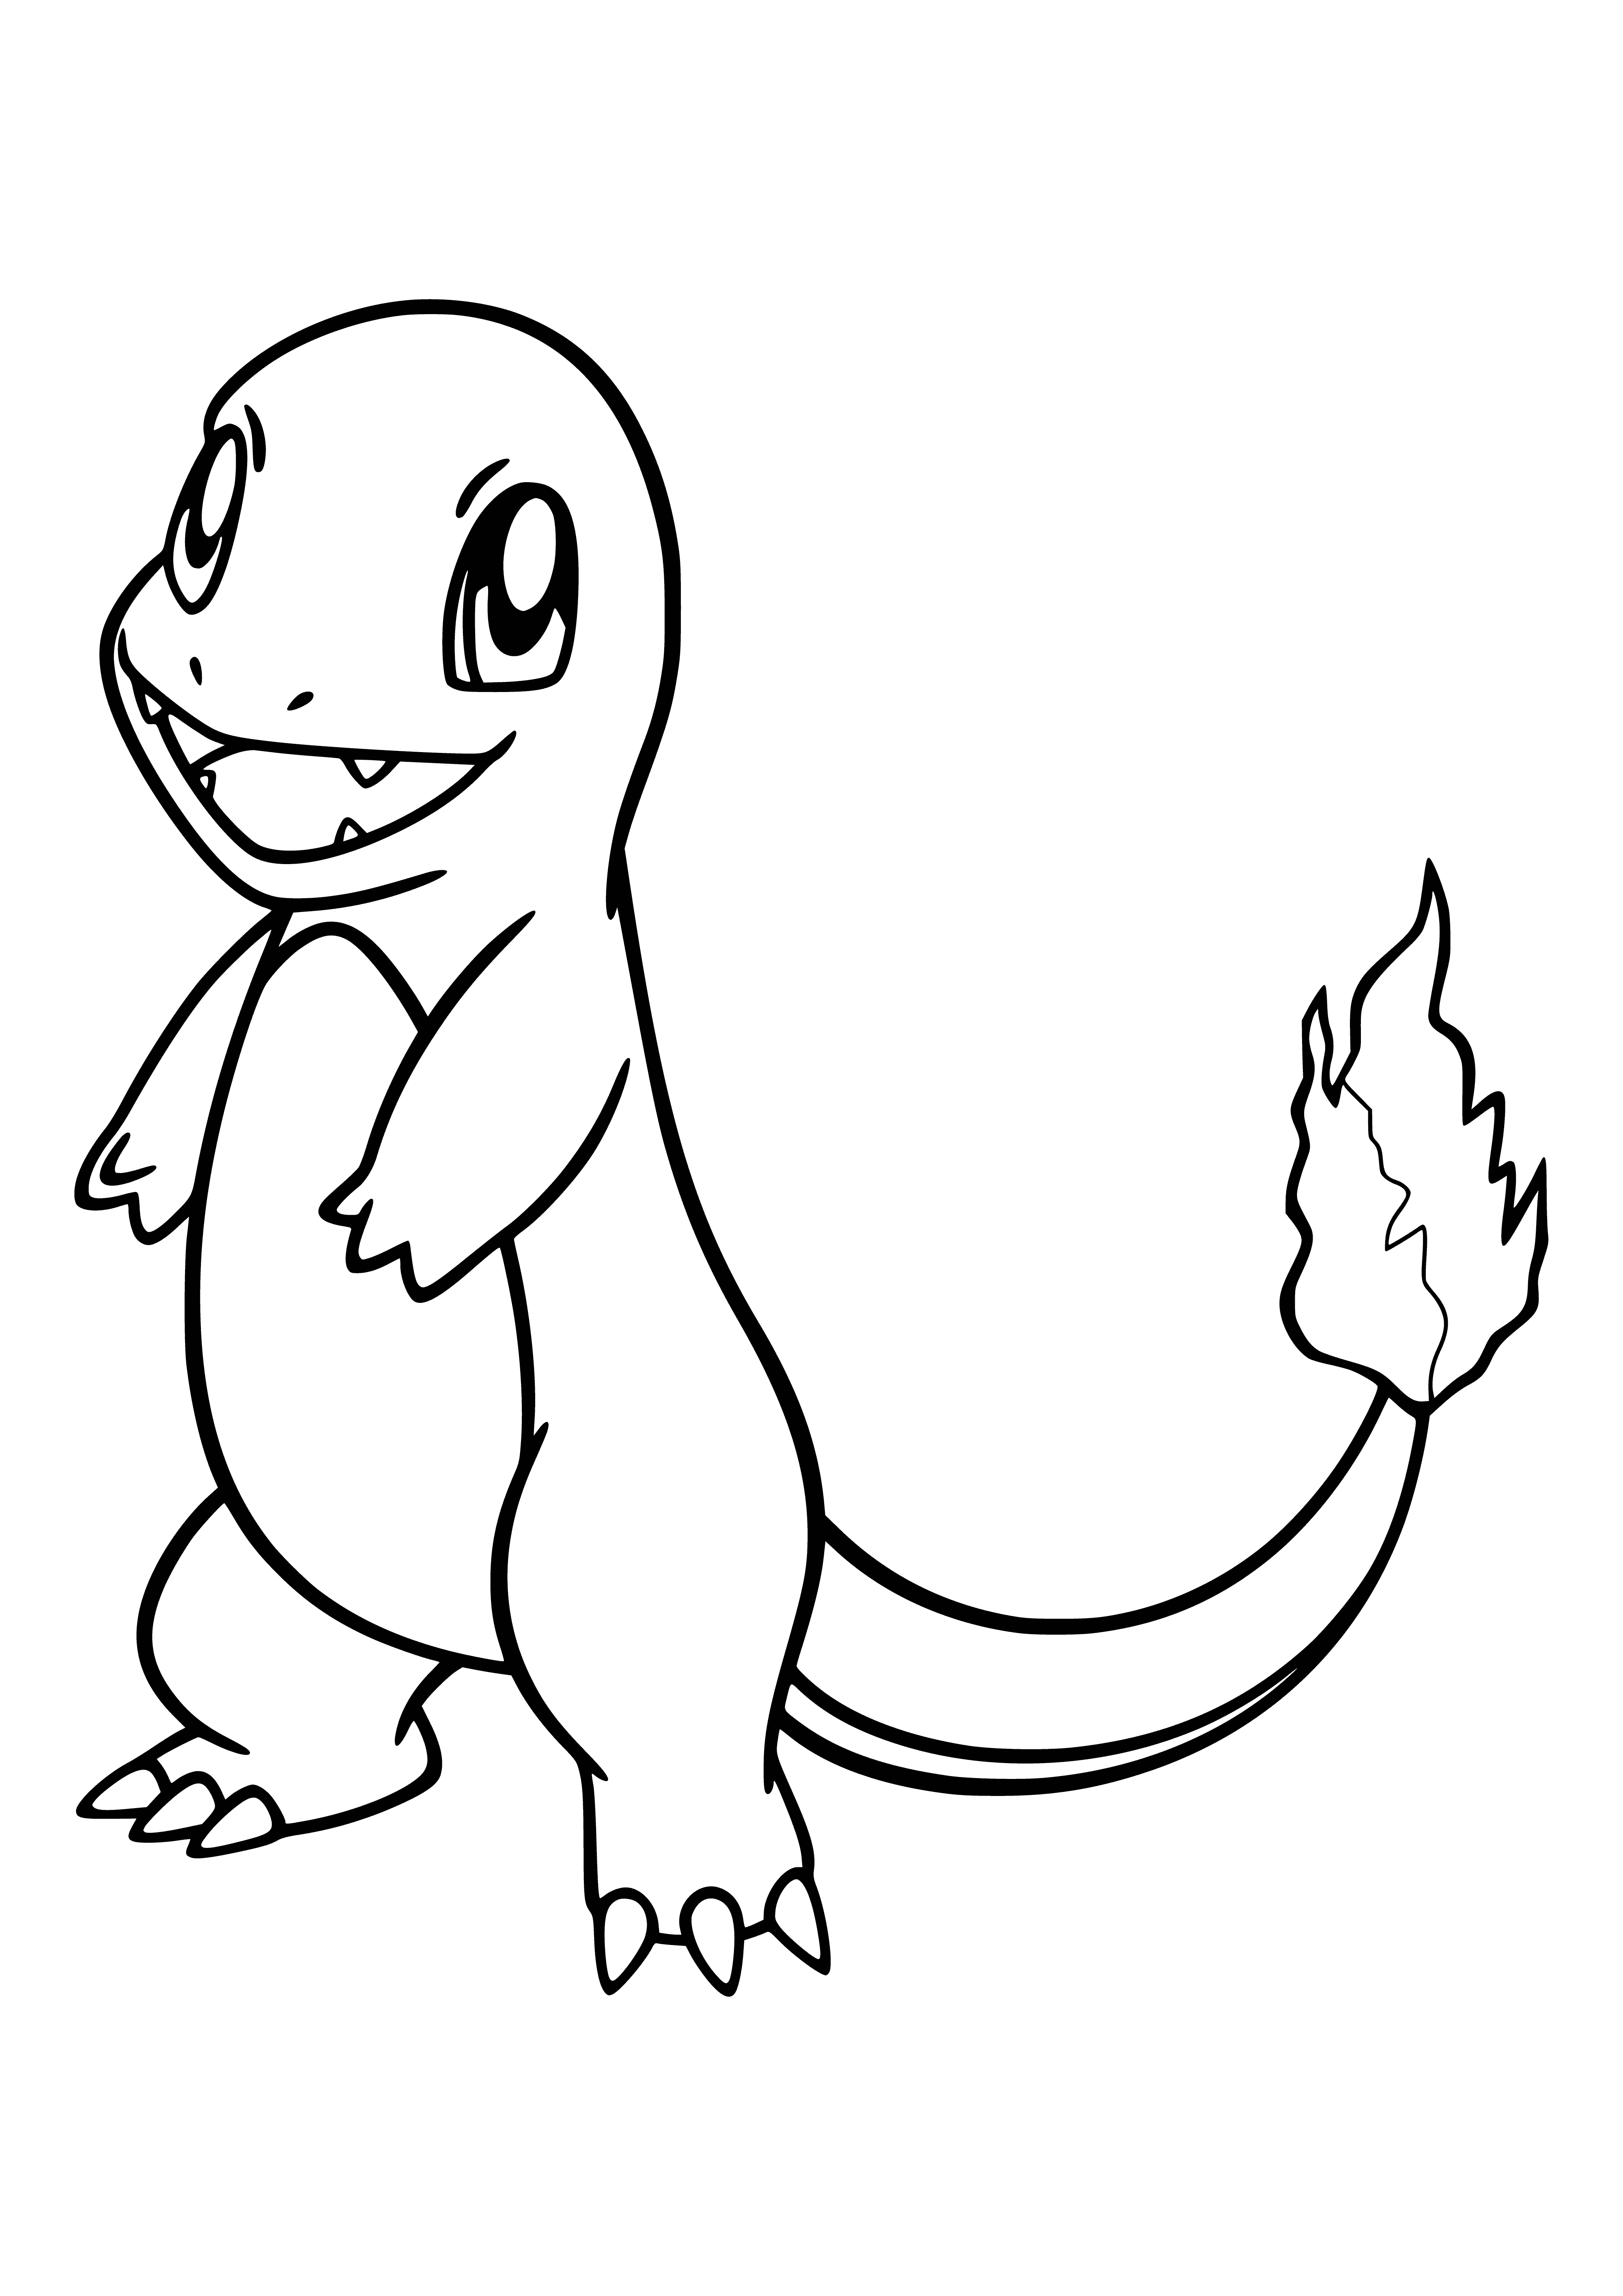 coloring page: Small orange lizard Pokemon with a flame-tipped tail, wings, black eyes and cream snout.